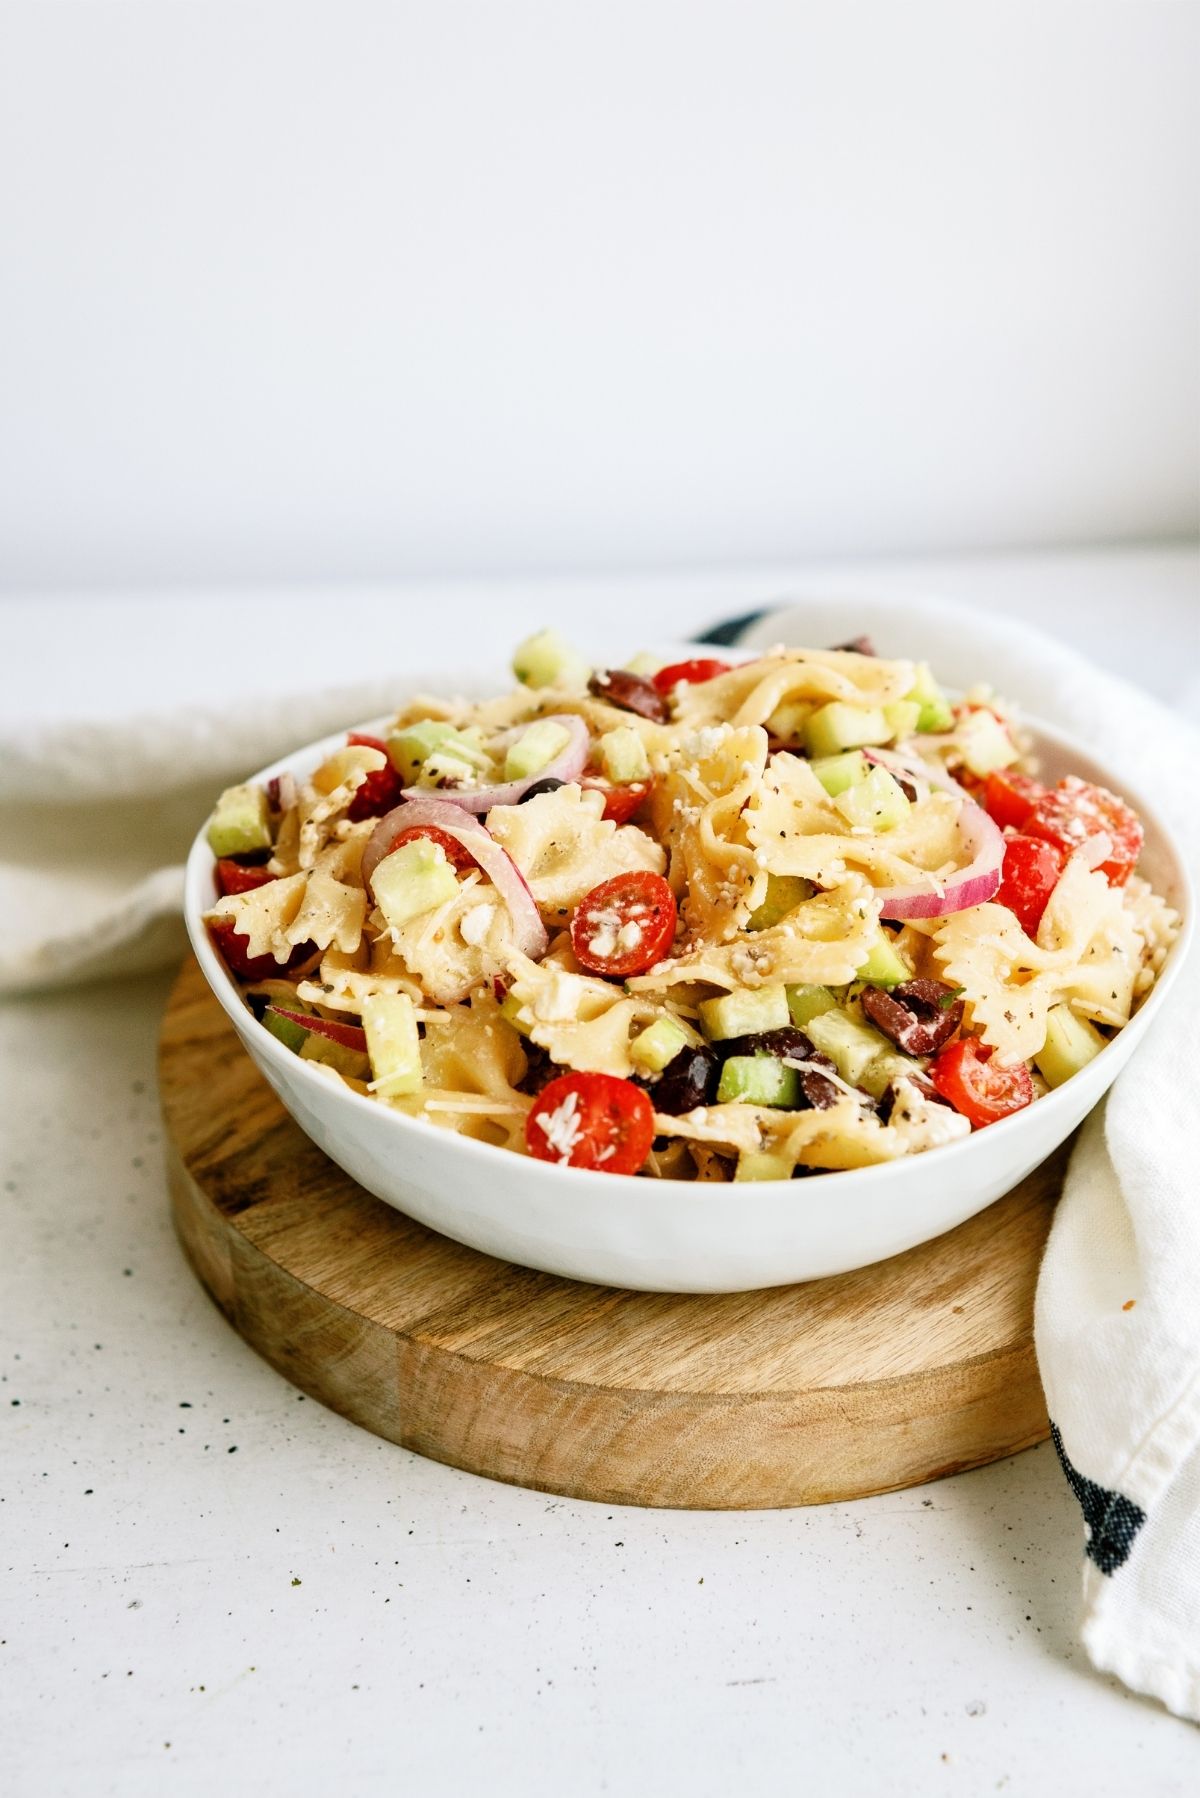 Greek Pasta Salad in a bowl on a wooden riser